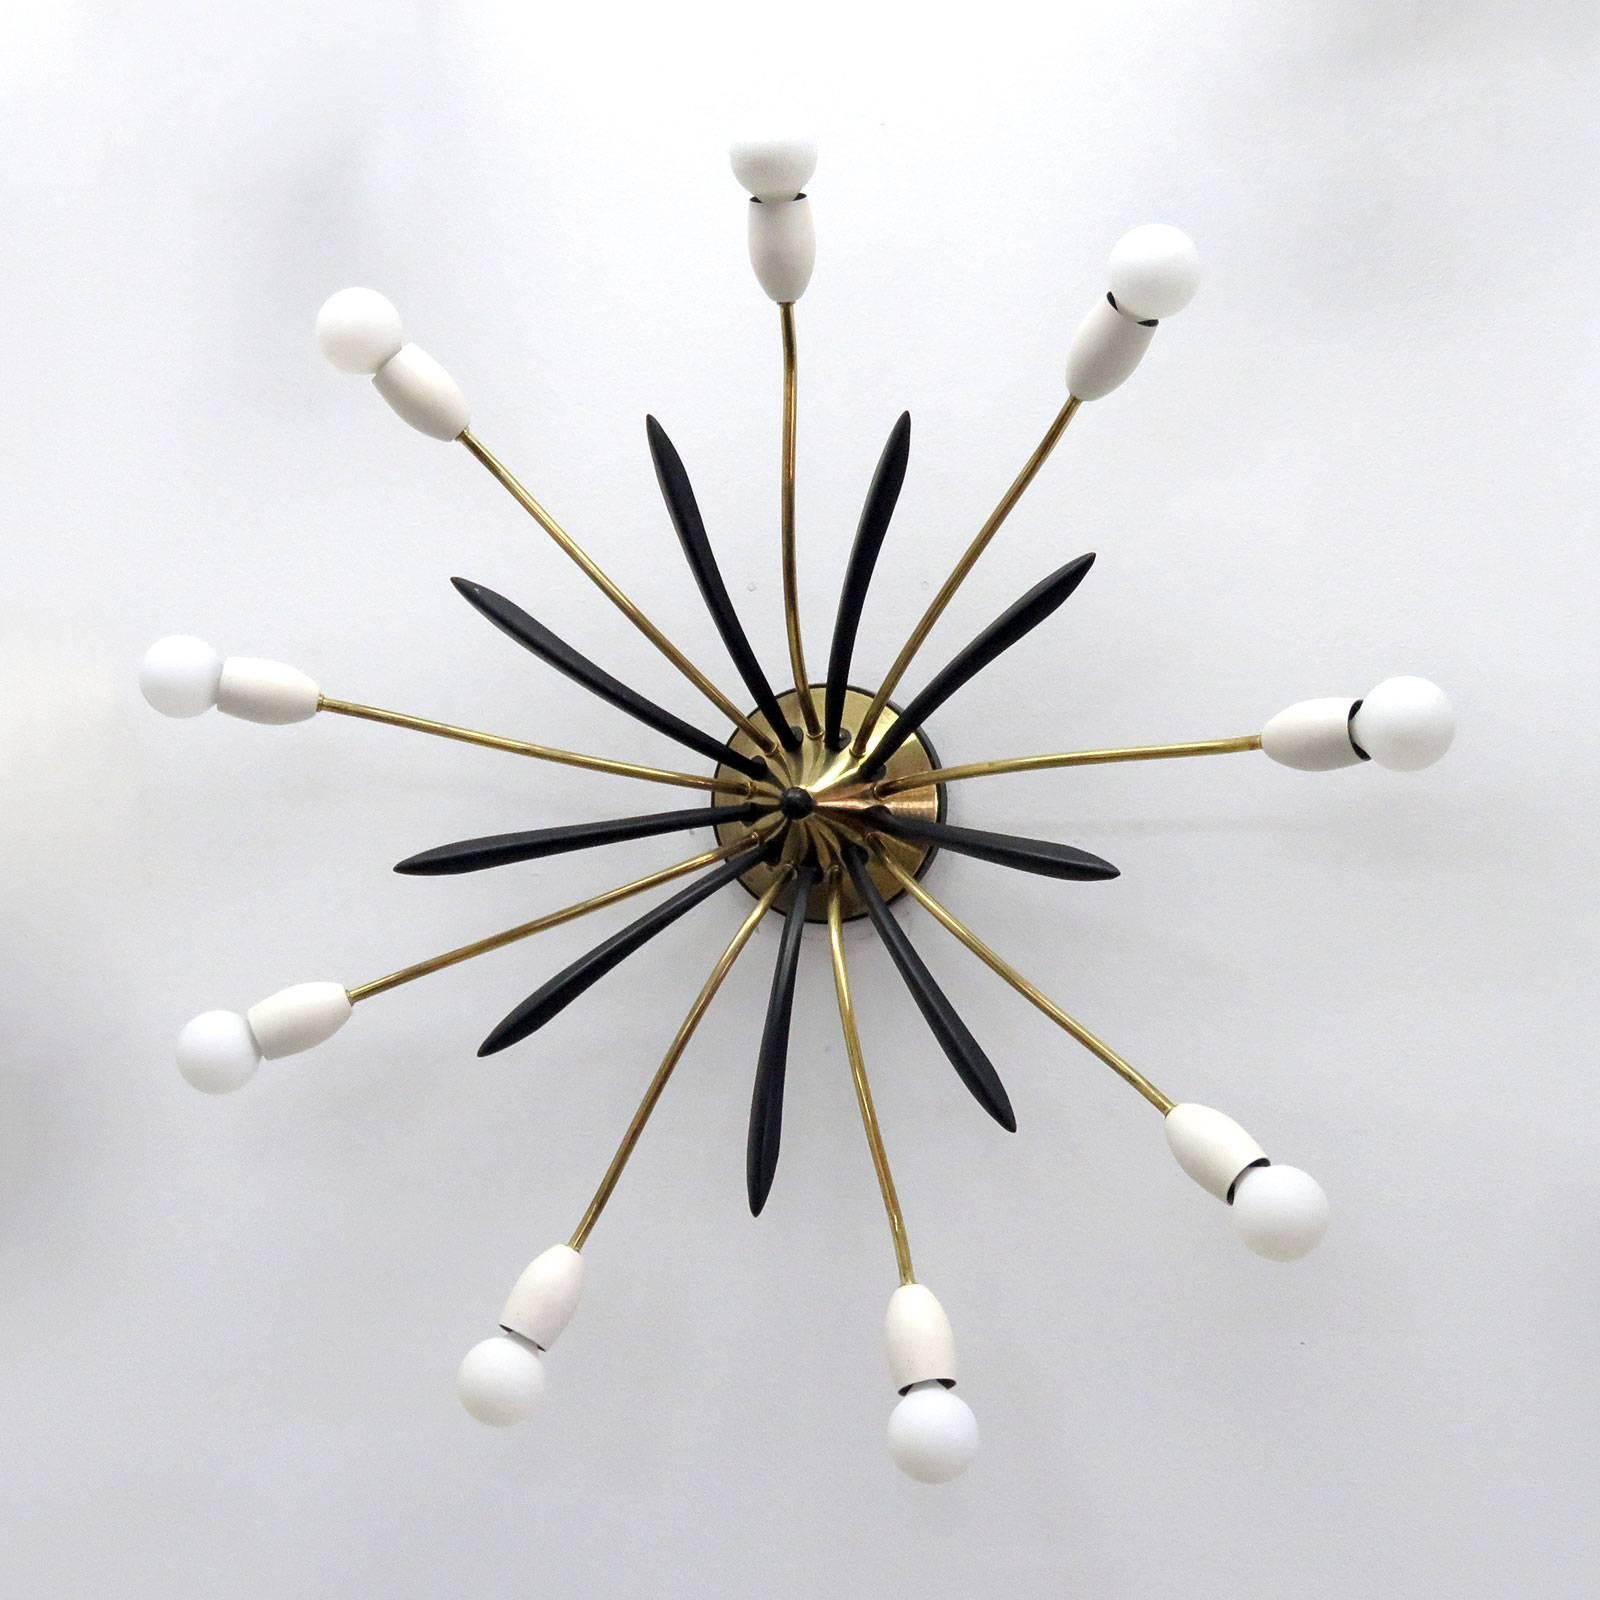 Wonderful large scale German nine-arm Sputnik in brass and enameled metal, can be used as wall or ceiling flush mount fixture, wired for US standards, nine E12 sockets, max. wattage 25w per socket, bulbs are provided as a one time courtesy.